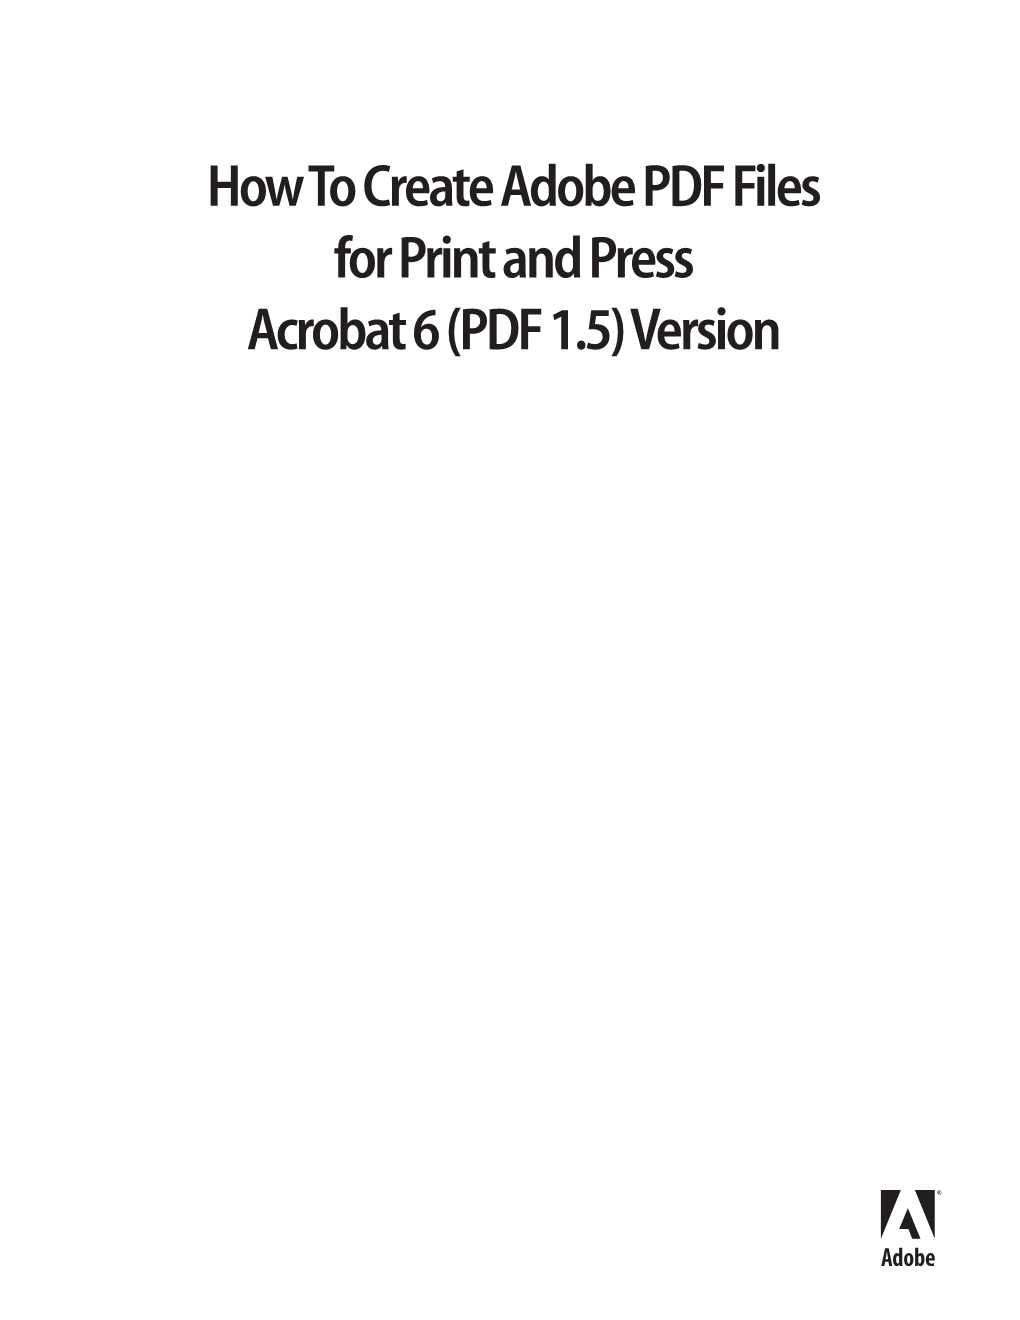 How to Create Adobe PDF Files for Print and Press Acrobat 6 (PDF 1.5) Version